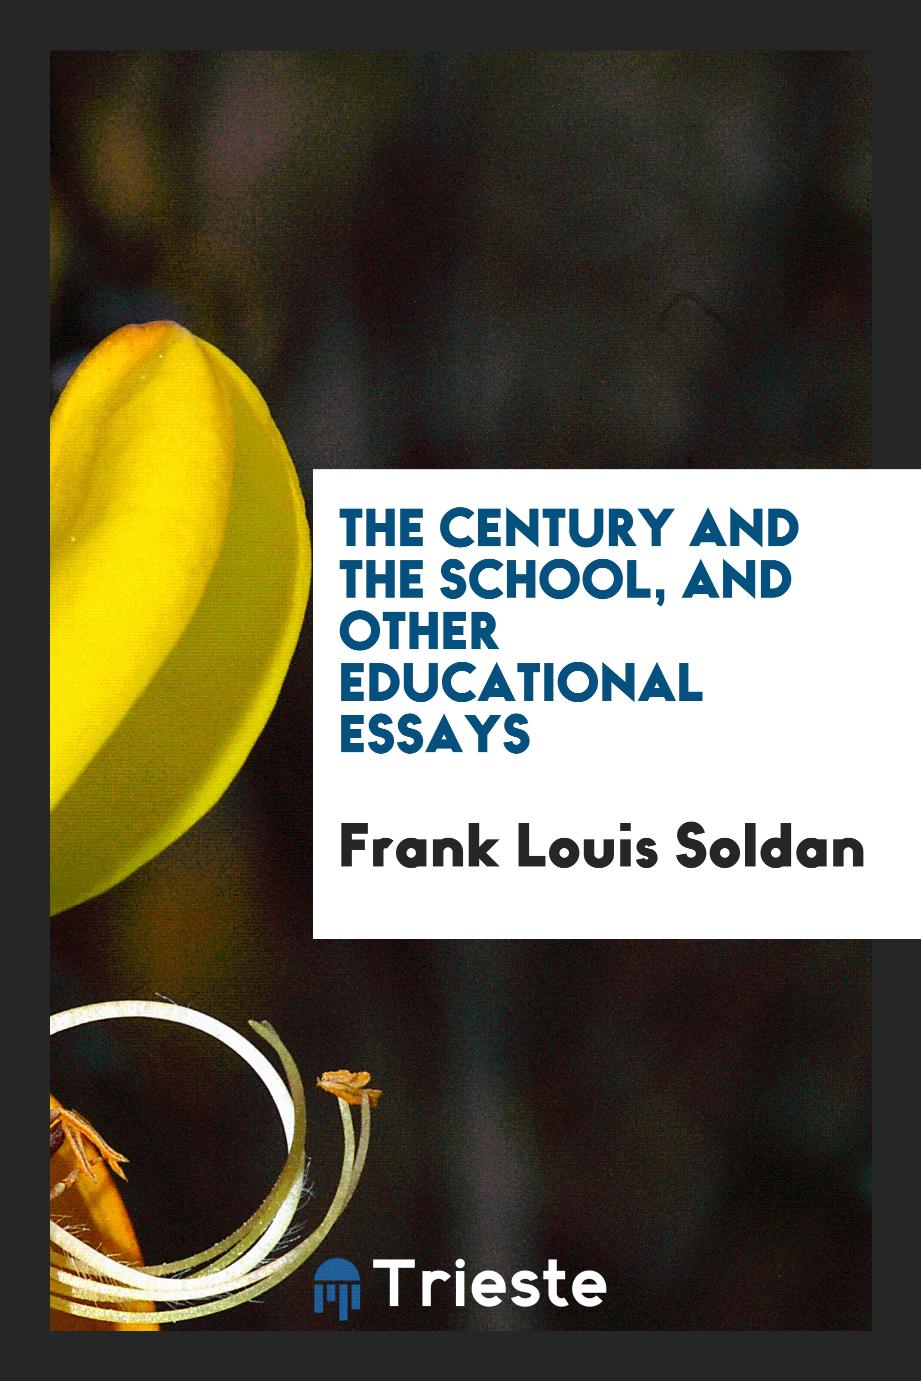 The century and the school, and other educational essays